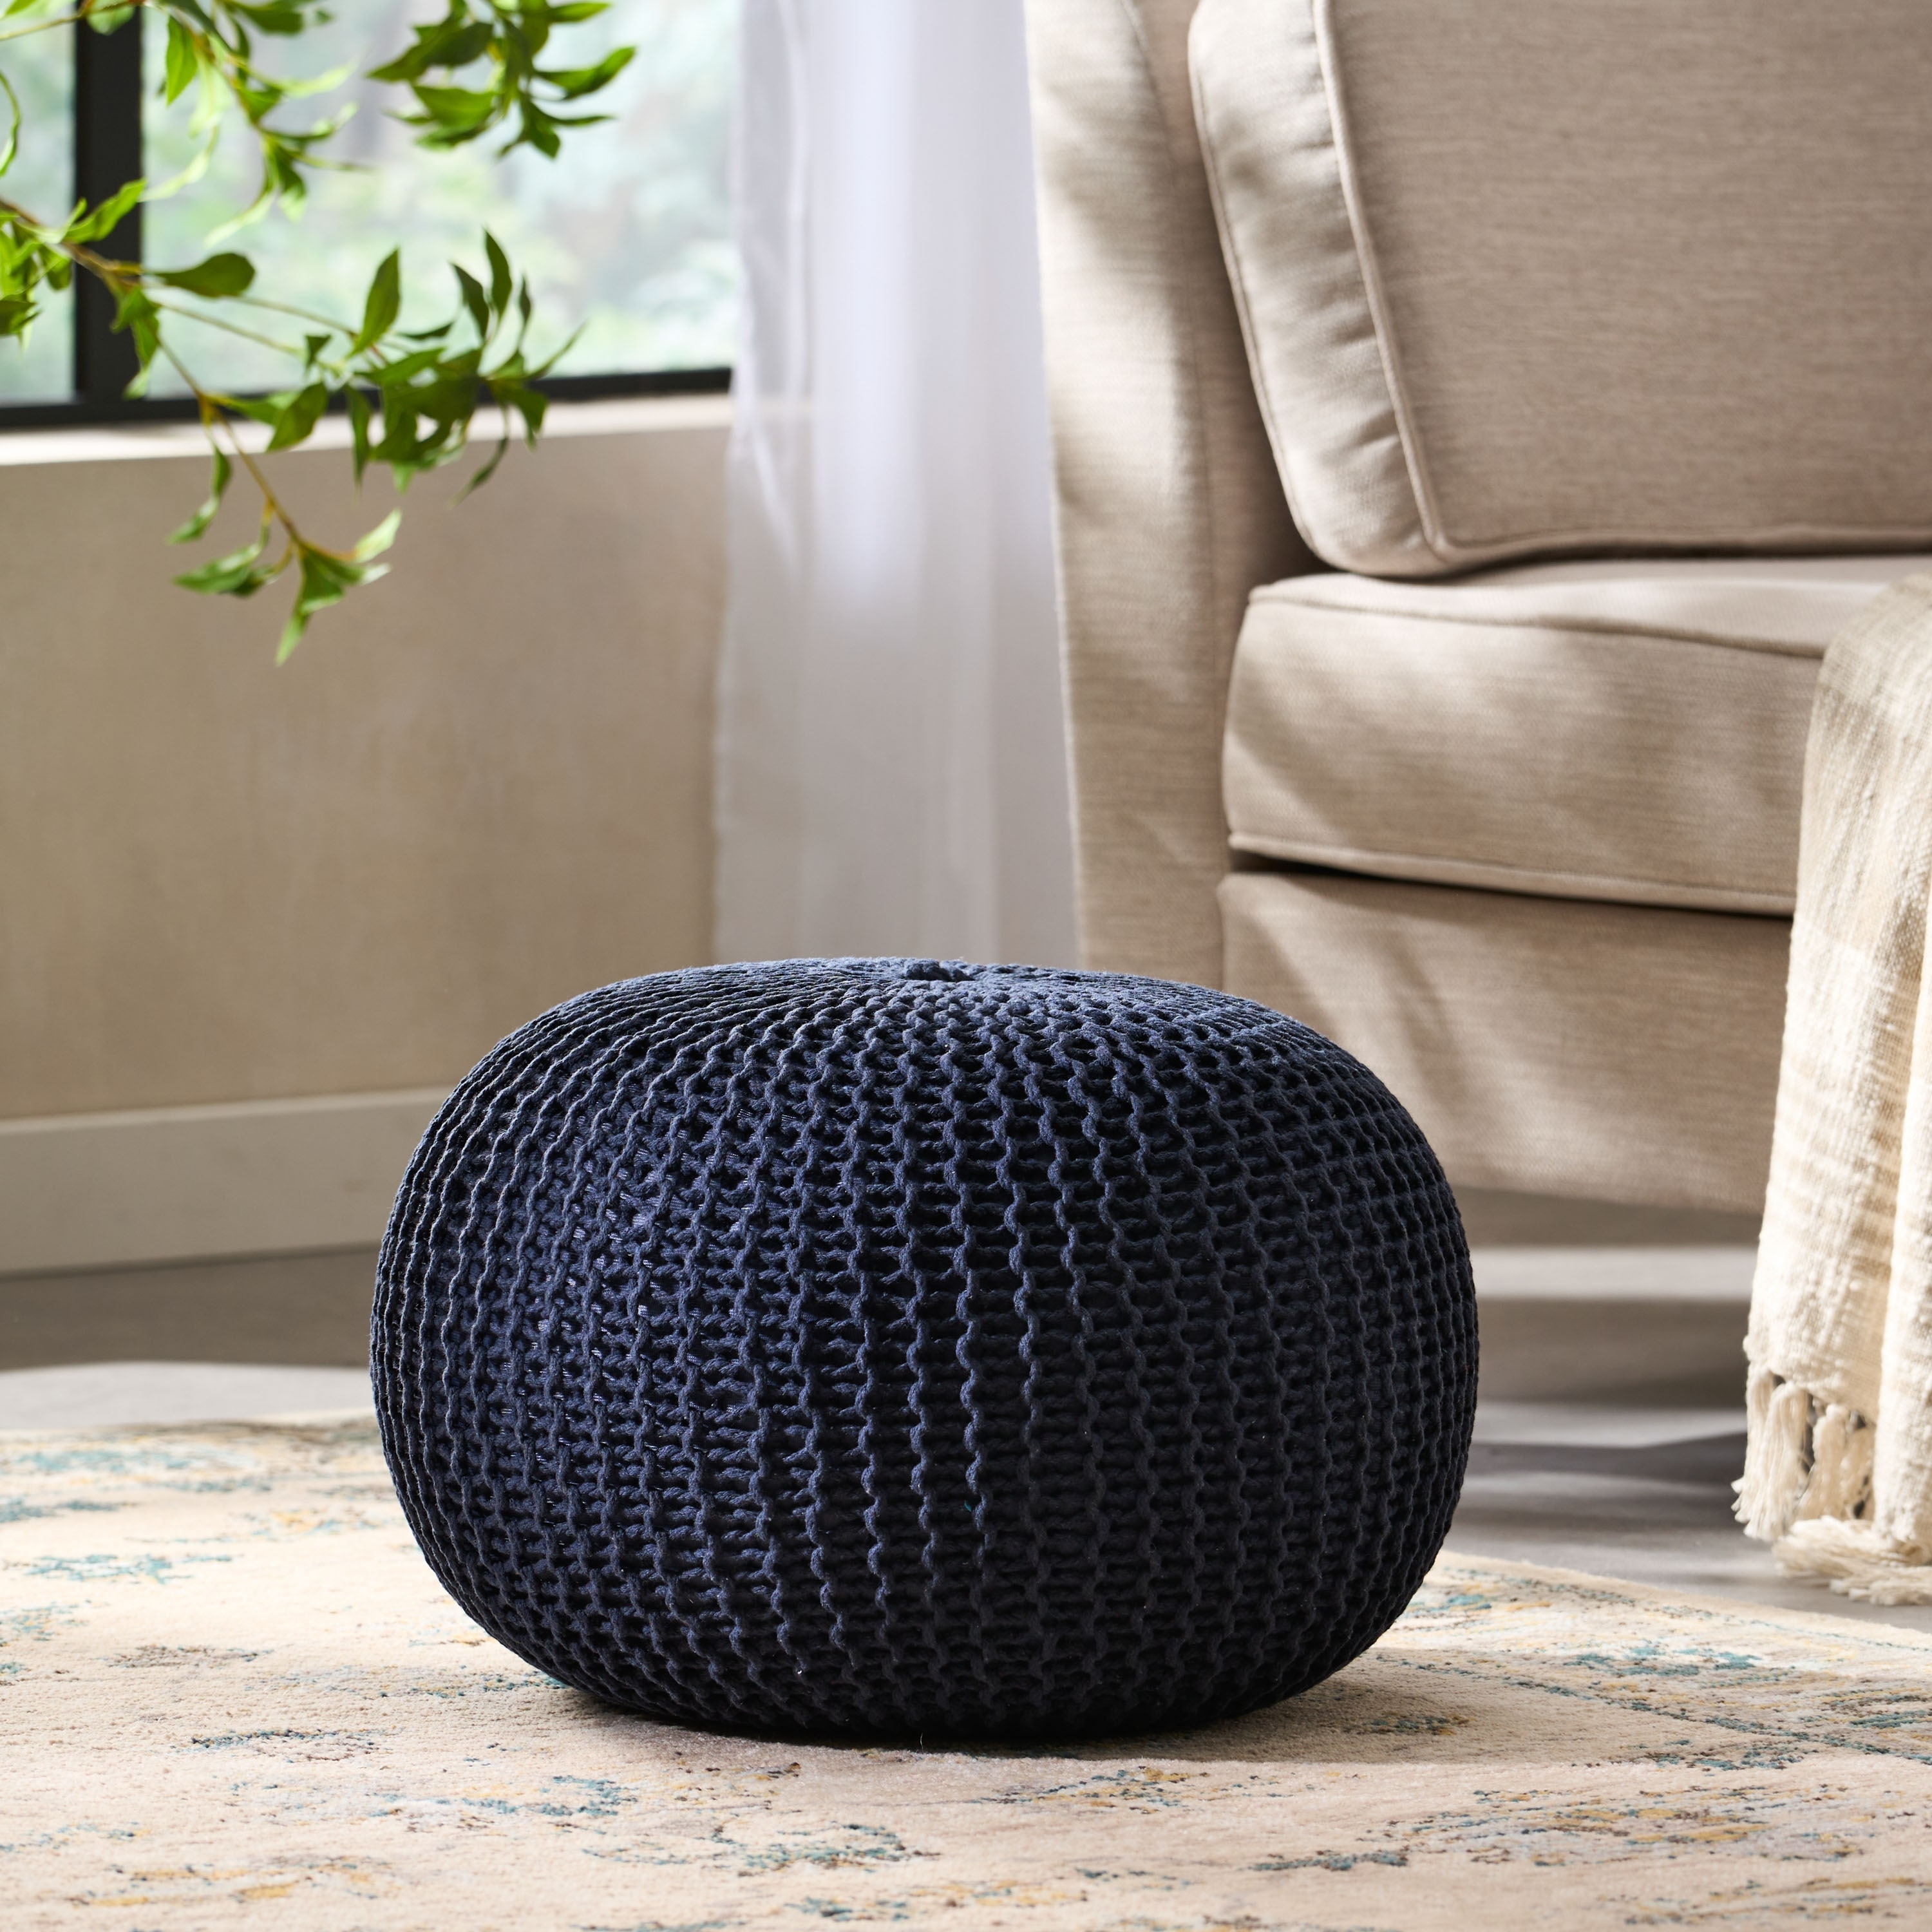 Rehab Your Favorite Pouf in 10 Minutes - Clover Lane